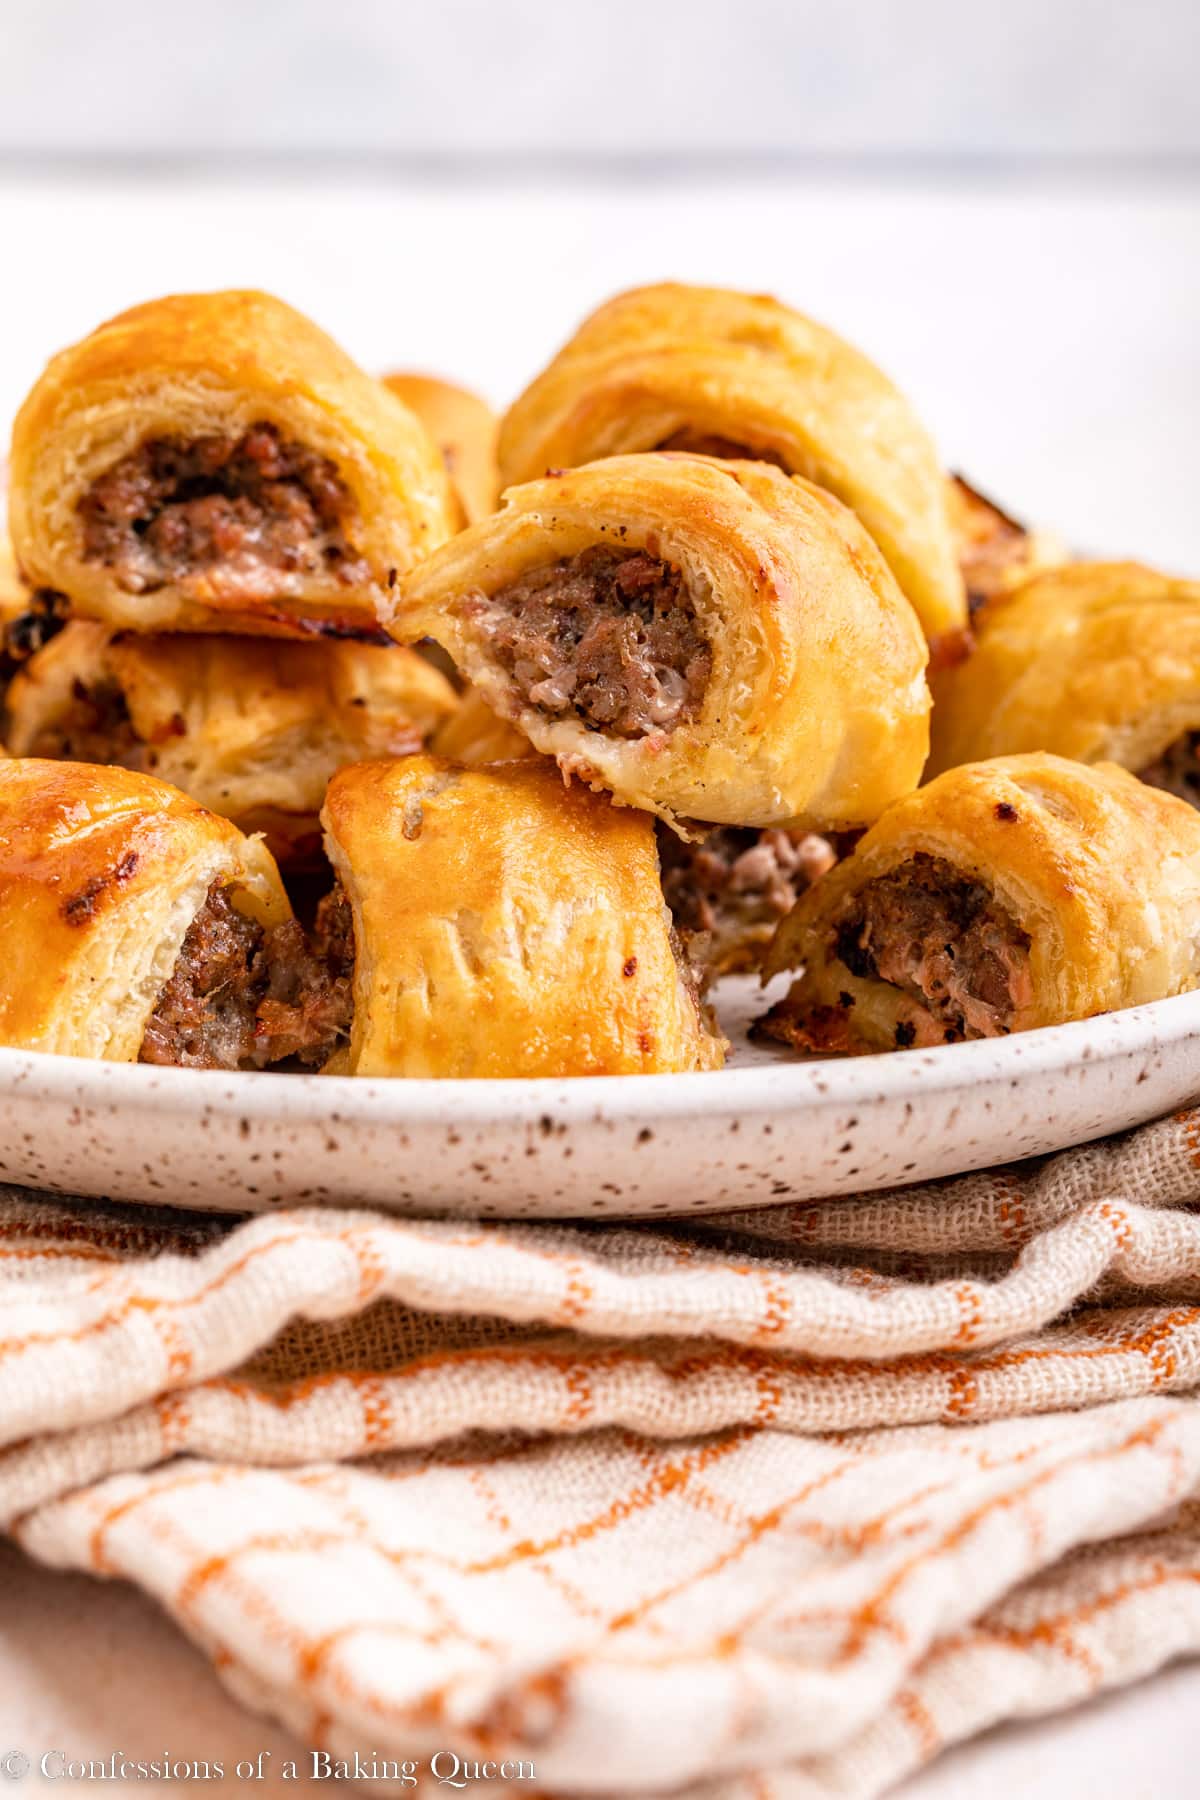 Sausage rolls on a plate.